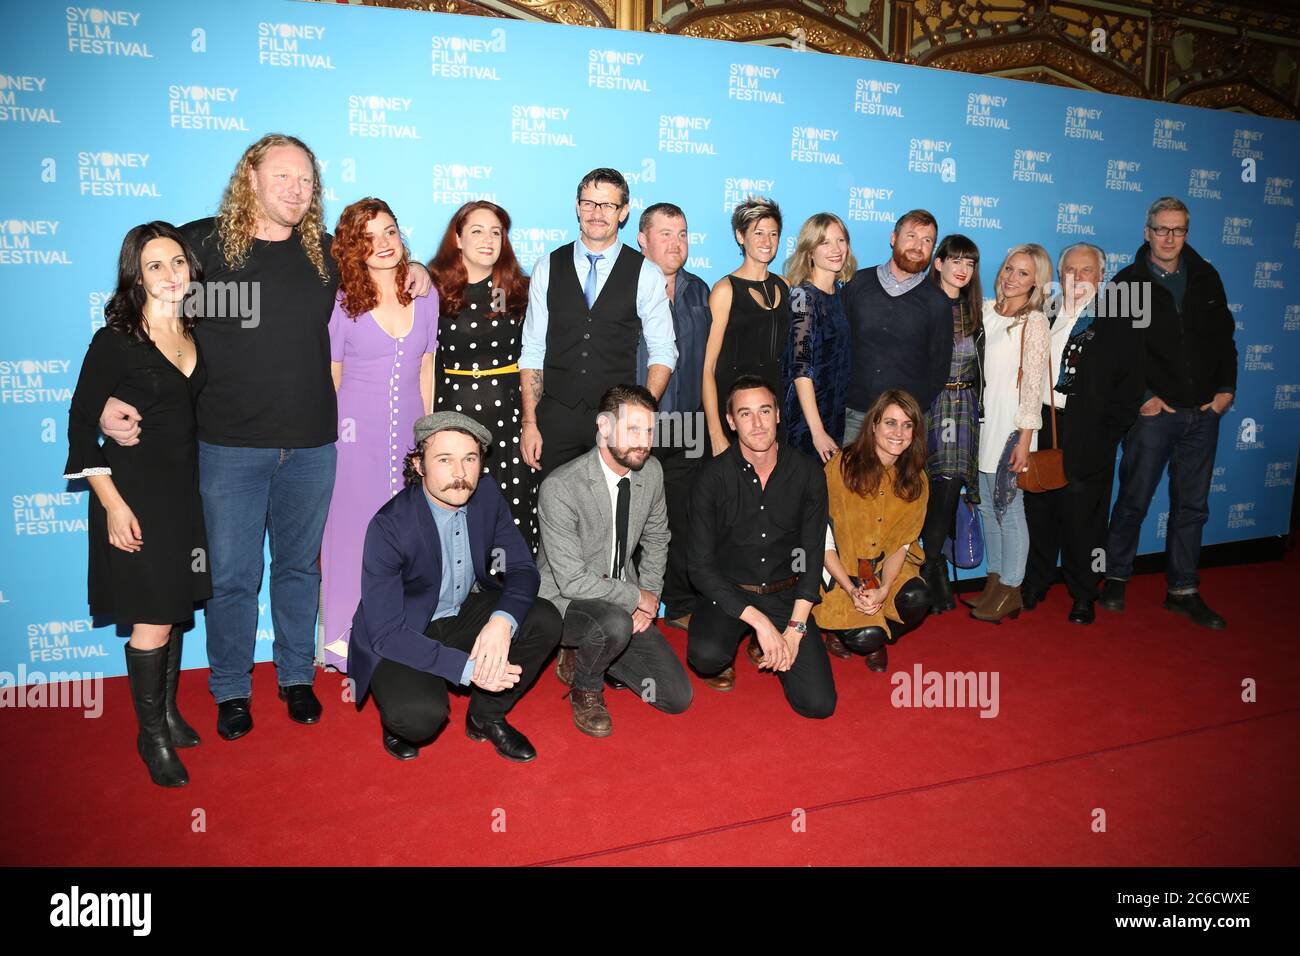 The cast and crew of the film ‘Fell’ on the red carpet at the world premiere at the State Theatre, 49 Market Street, Sydney, Australia as part of the Stock Photo